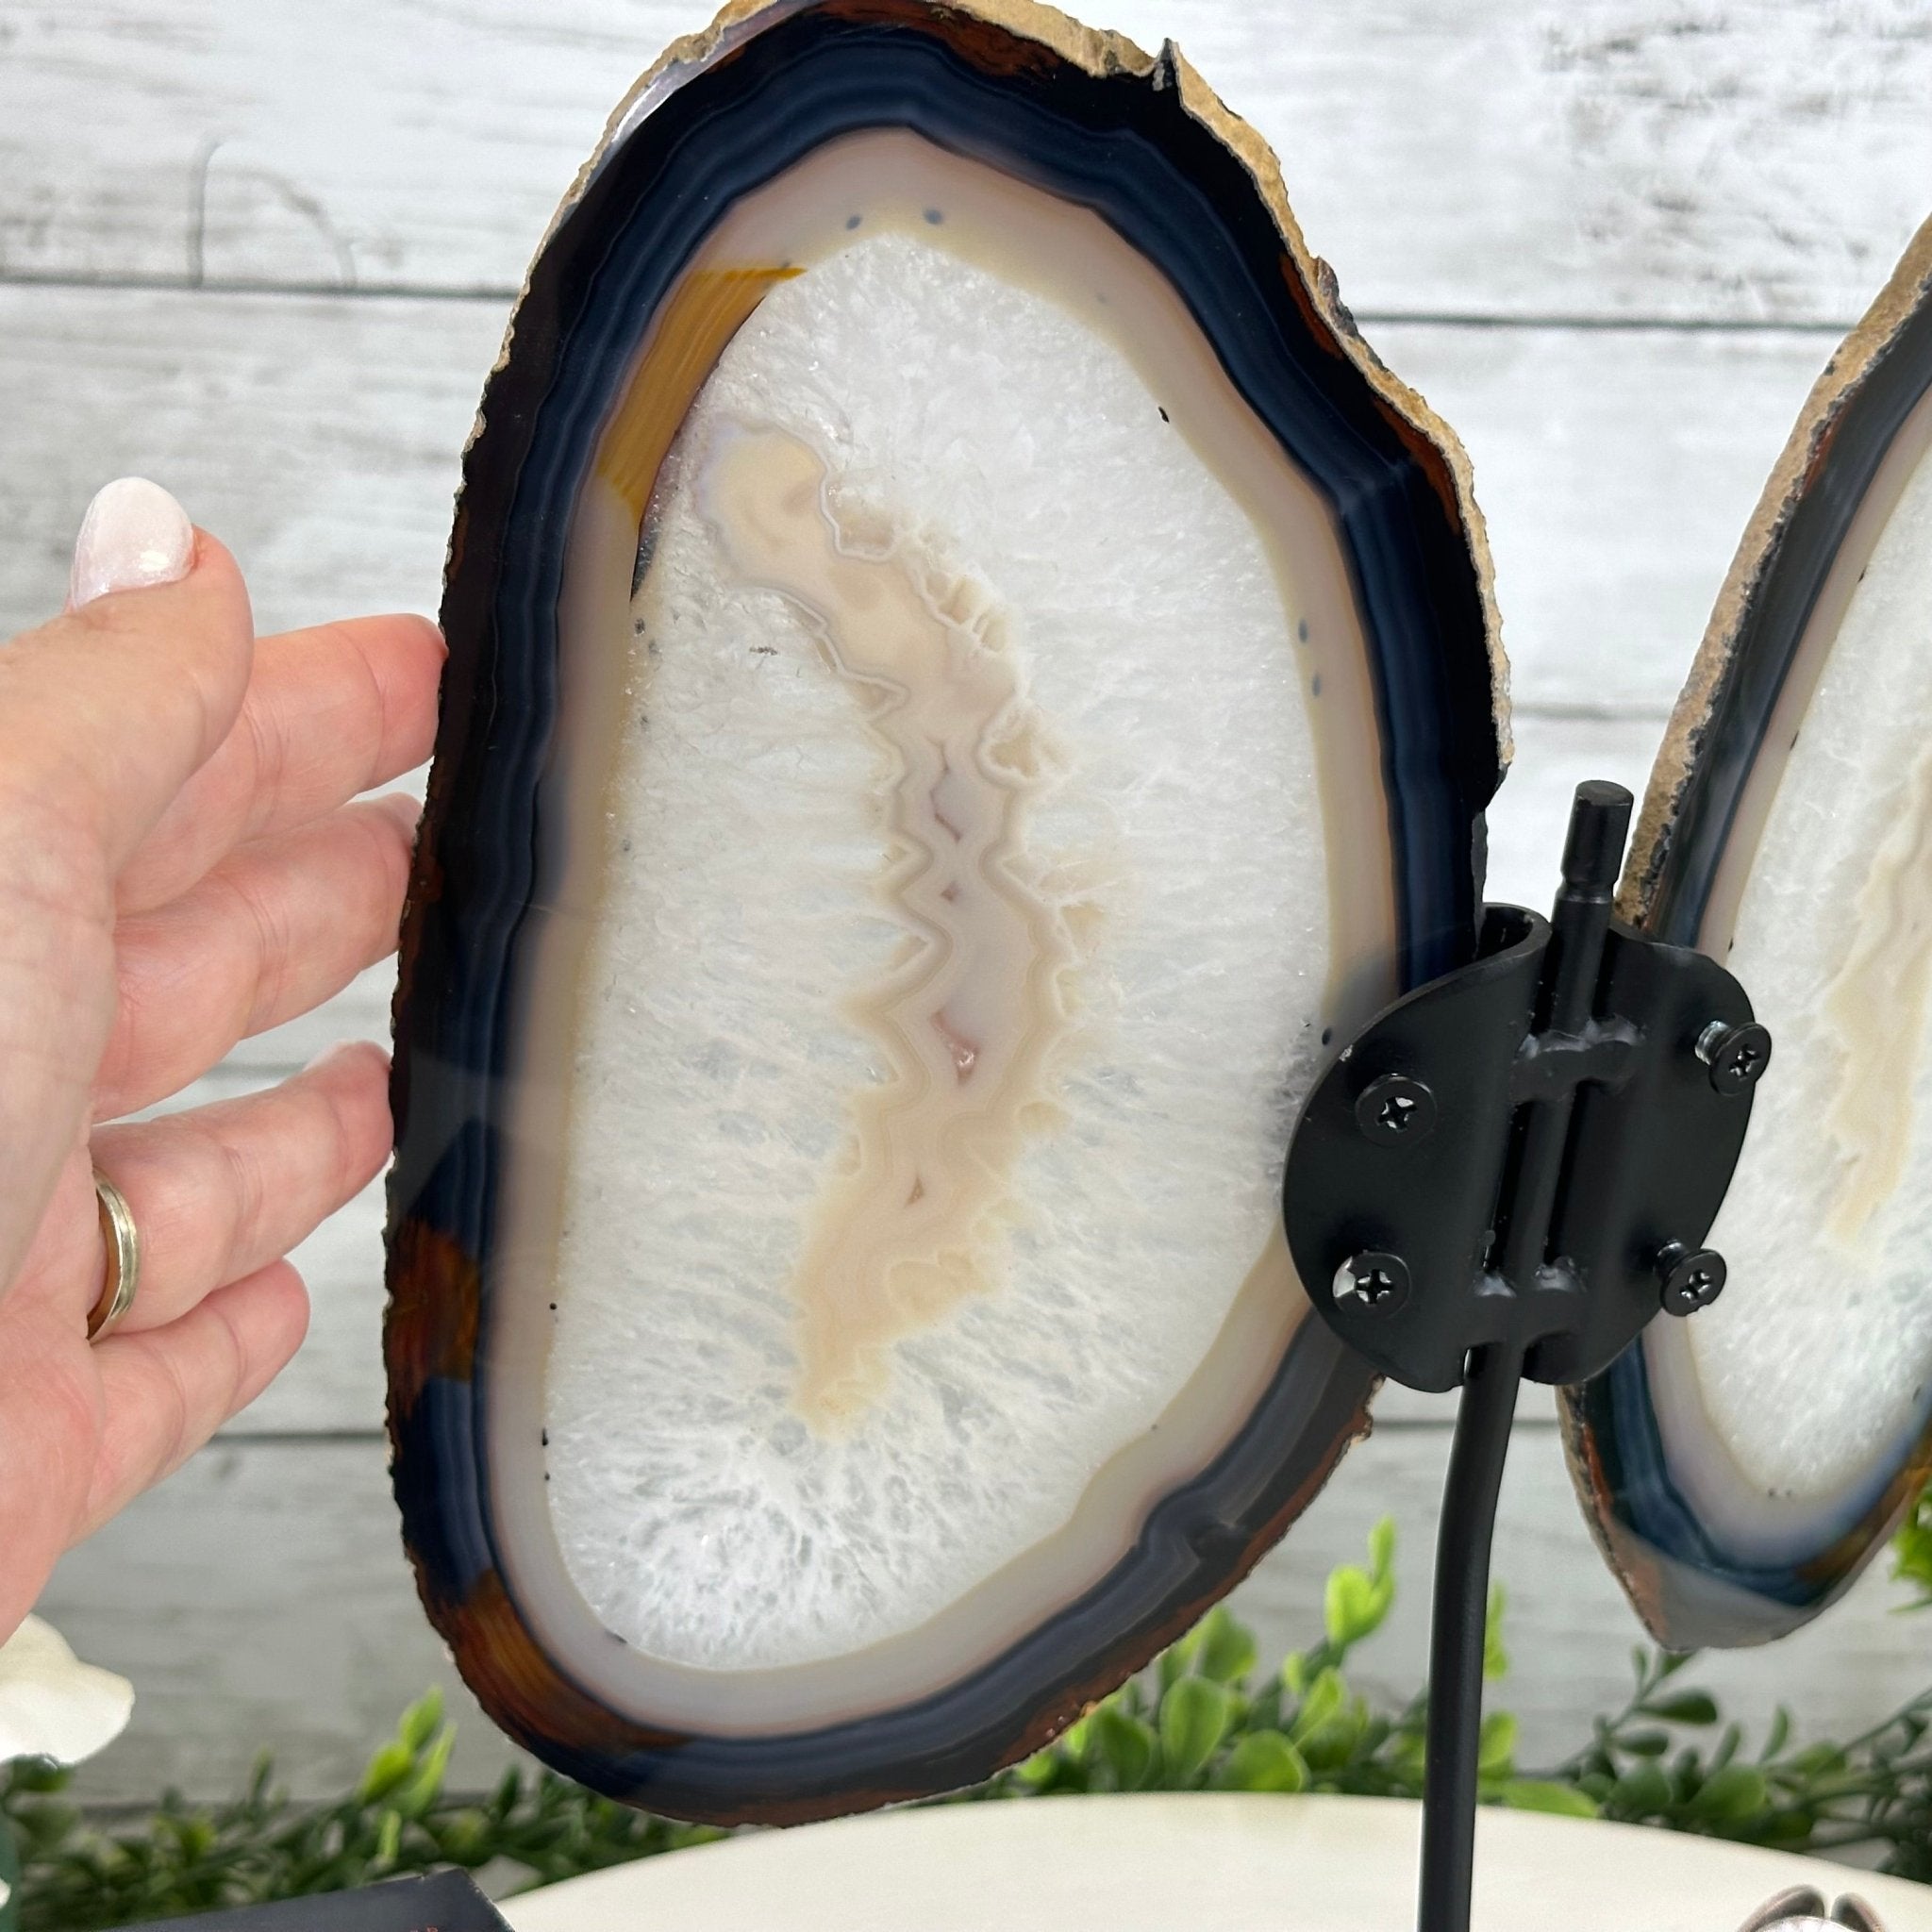 Natural Brazilian Agate "Butterfly Wings", 11.1" Tall #5050NA-131 - Brazil GemsBrazil GemsNatural Brazilian Agate "Butterfly Wings", 11.1" Tall #5050NA-131Agate Butterfly Wings5050NA-131